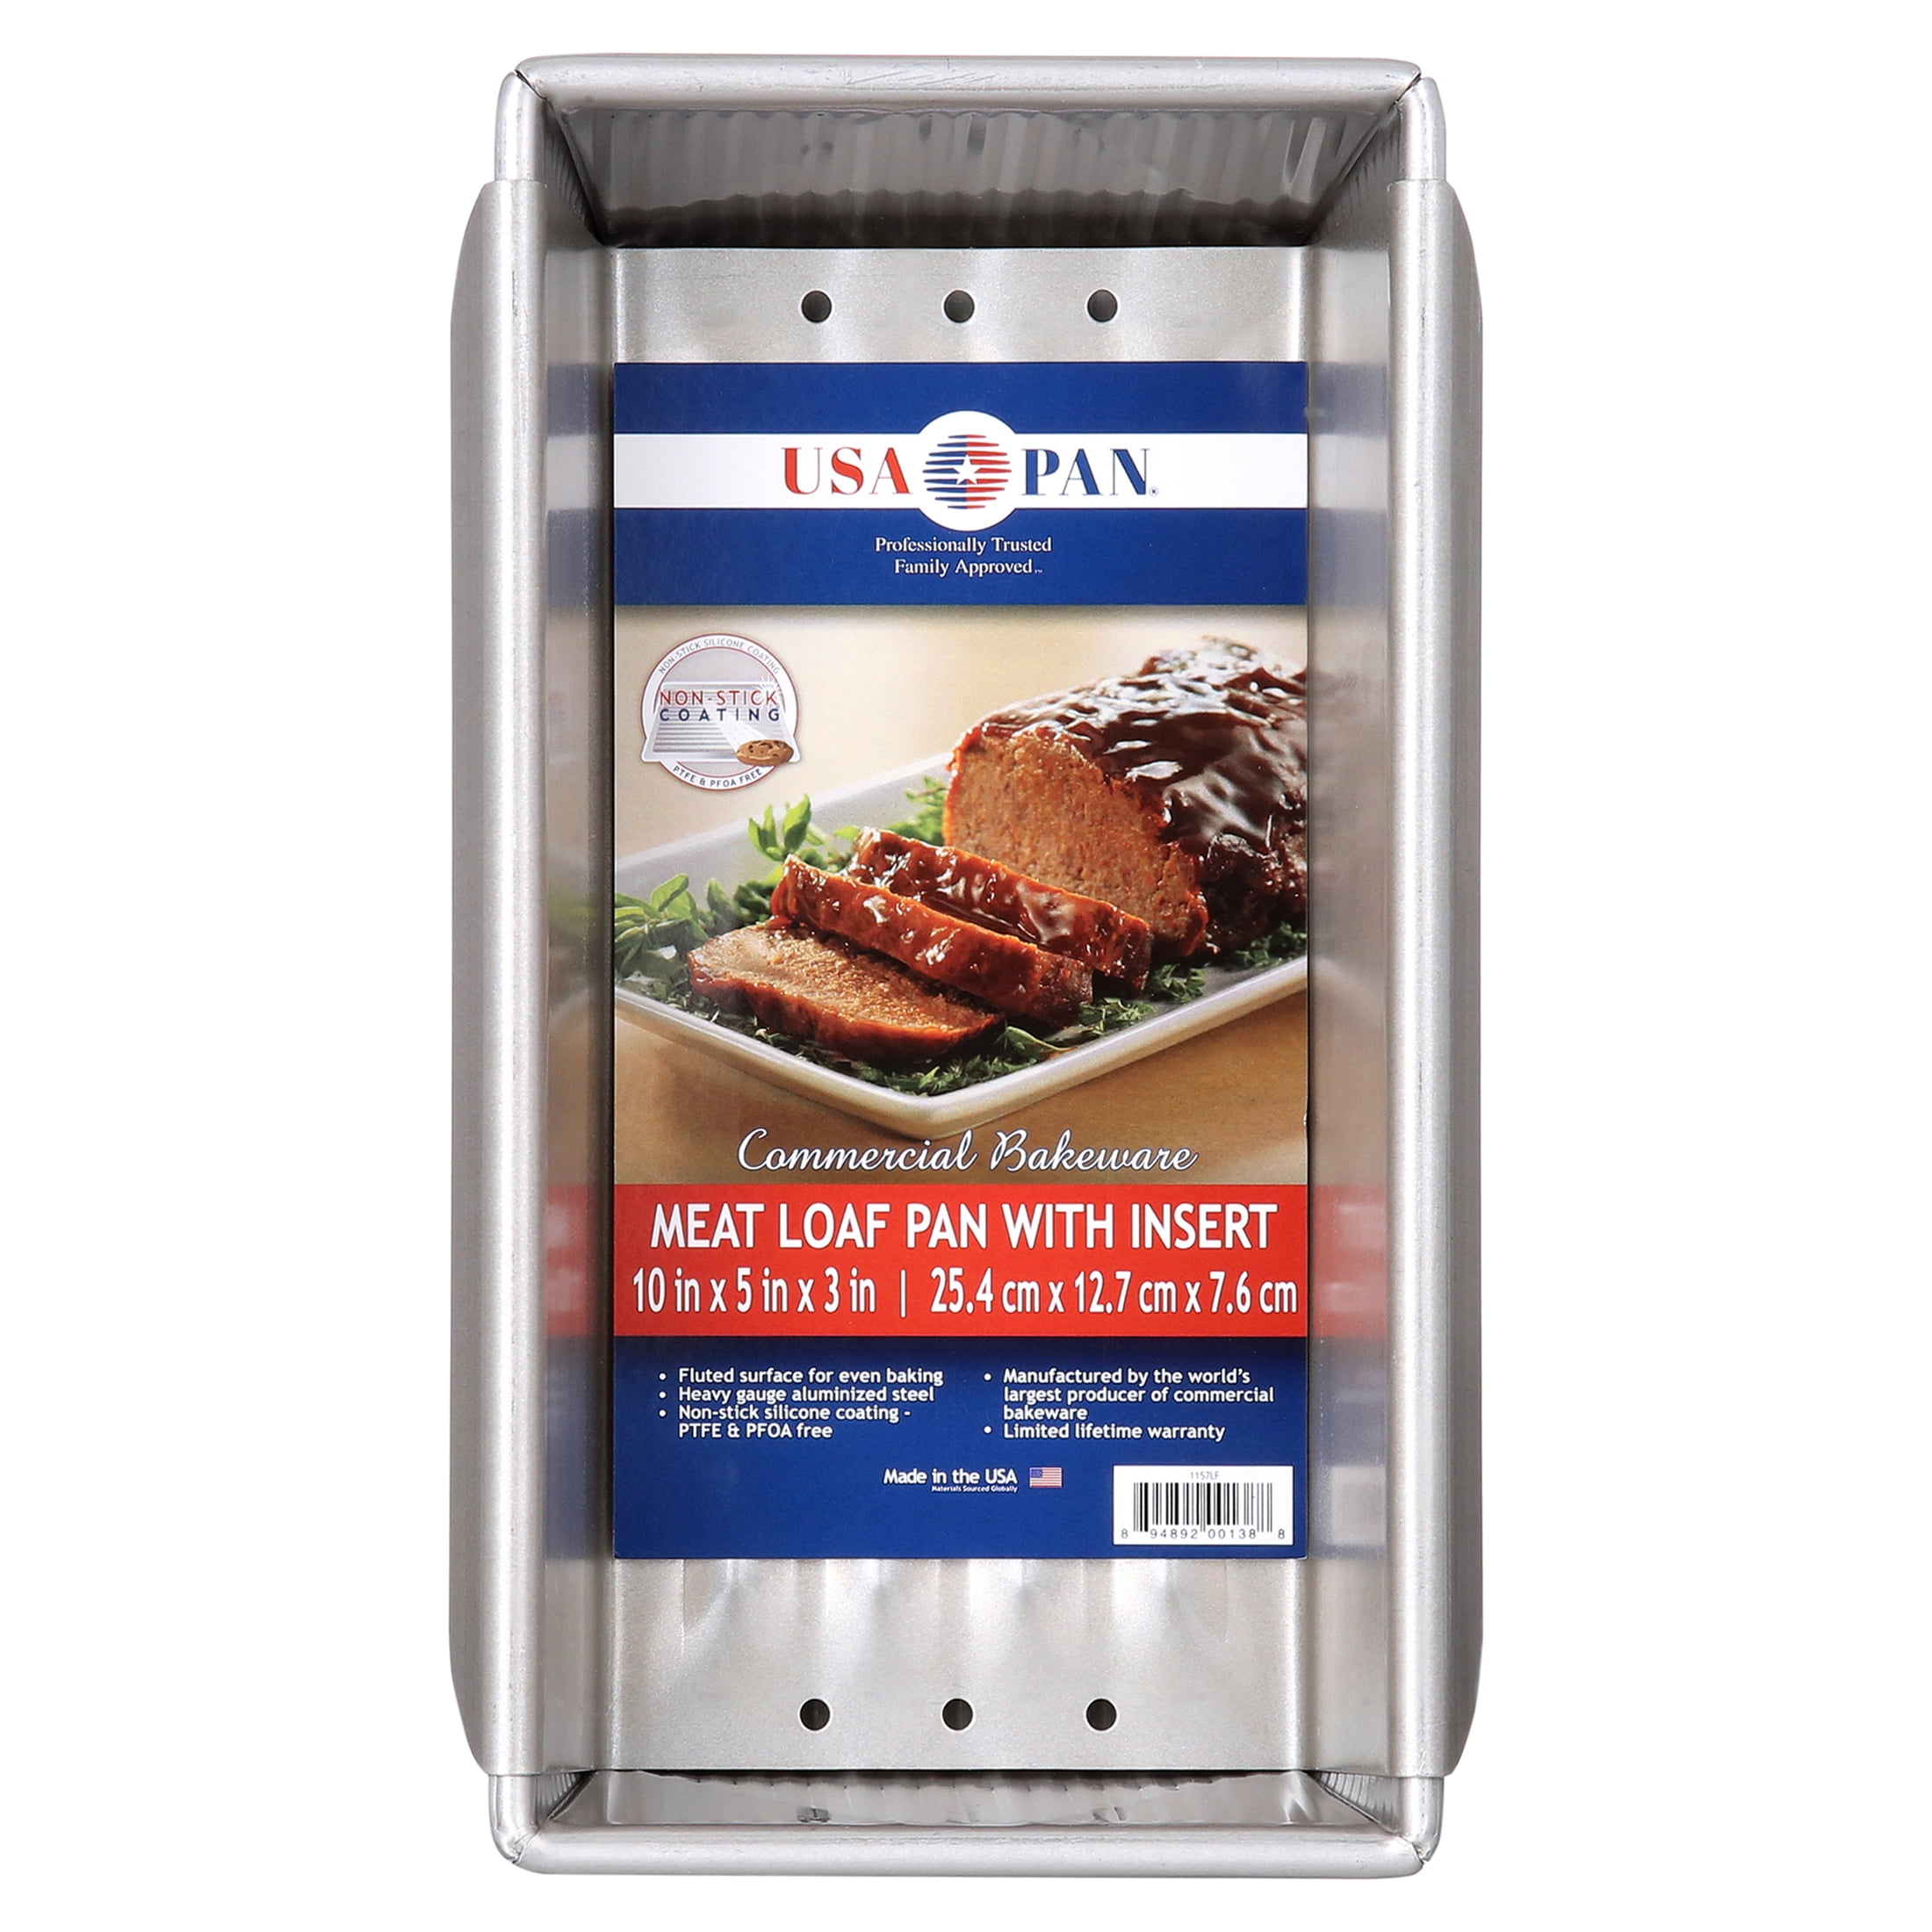 USA Pan Nonstick Meat Loaf Pan with Insert, 2 Piece Set 